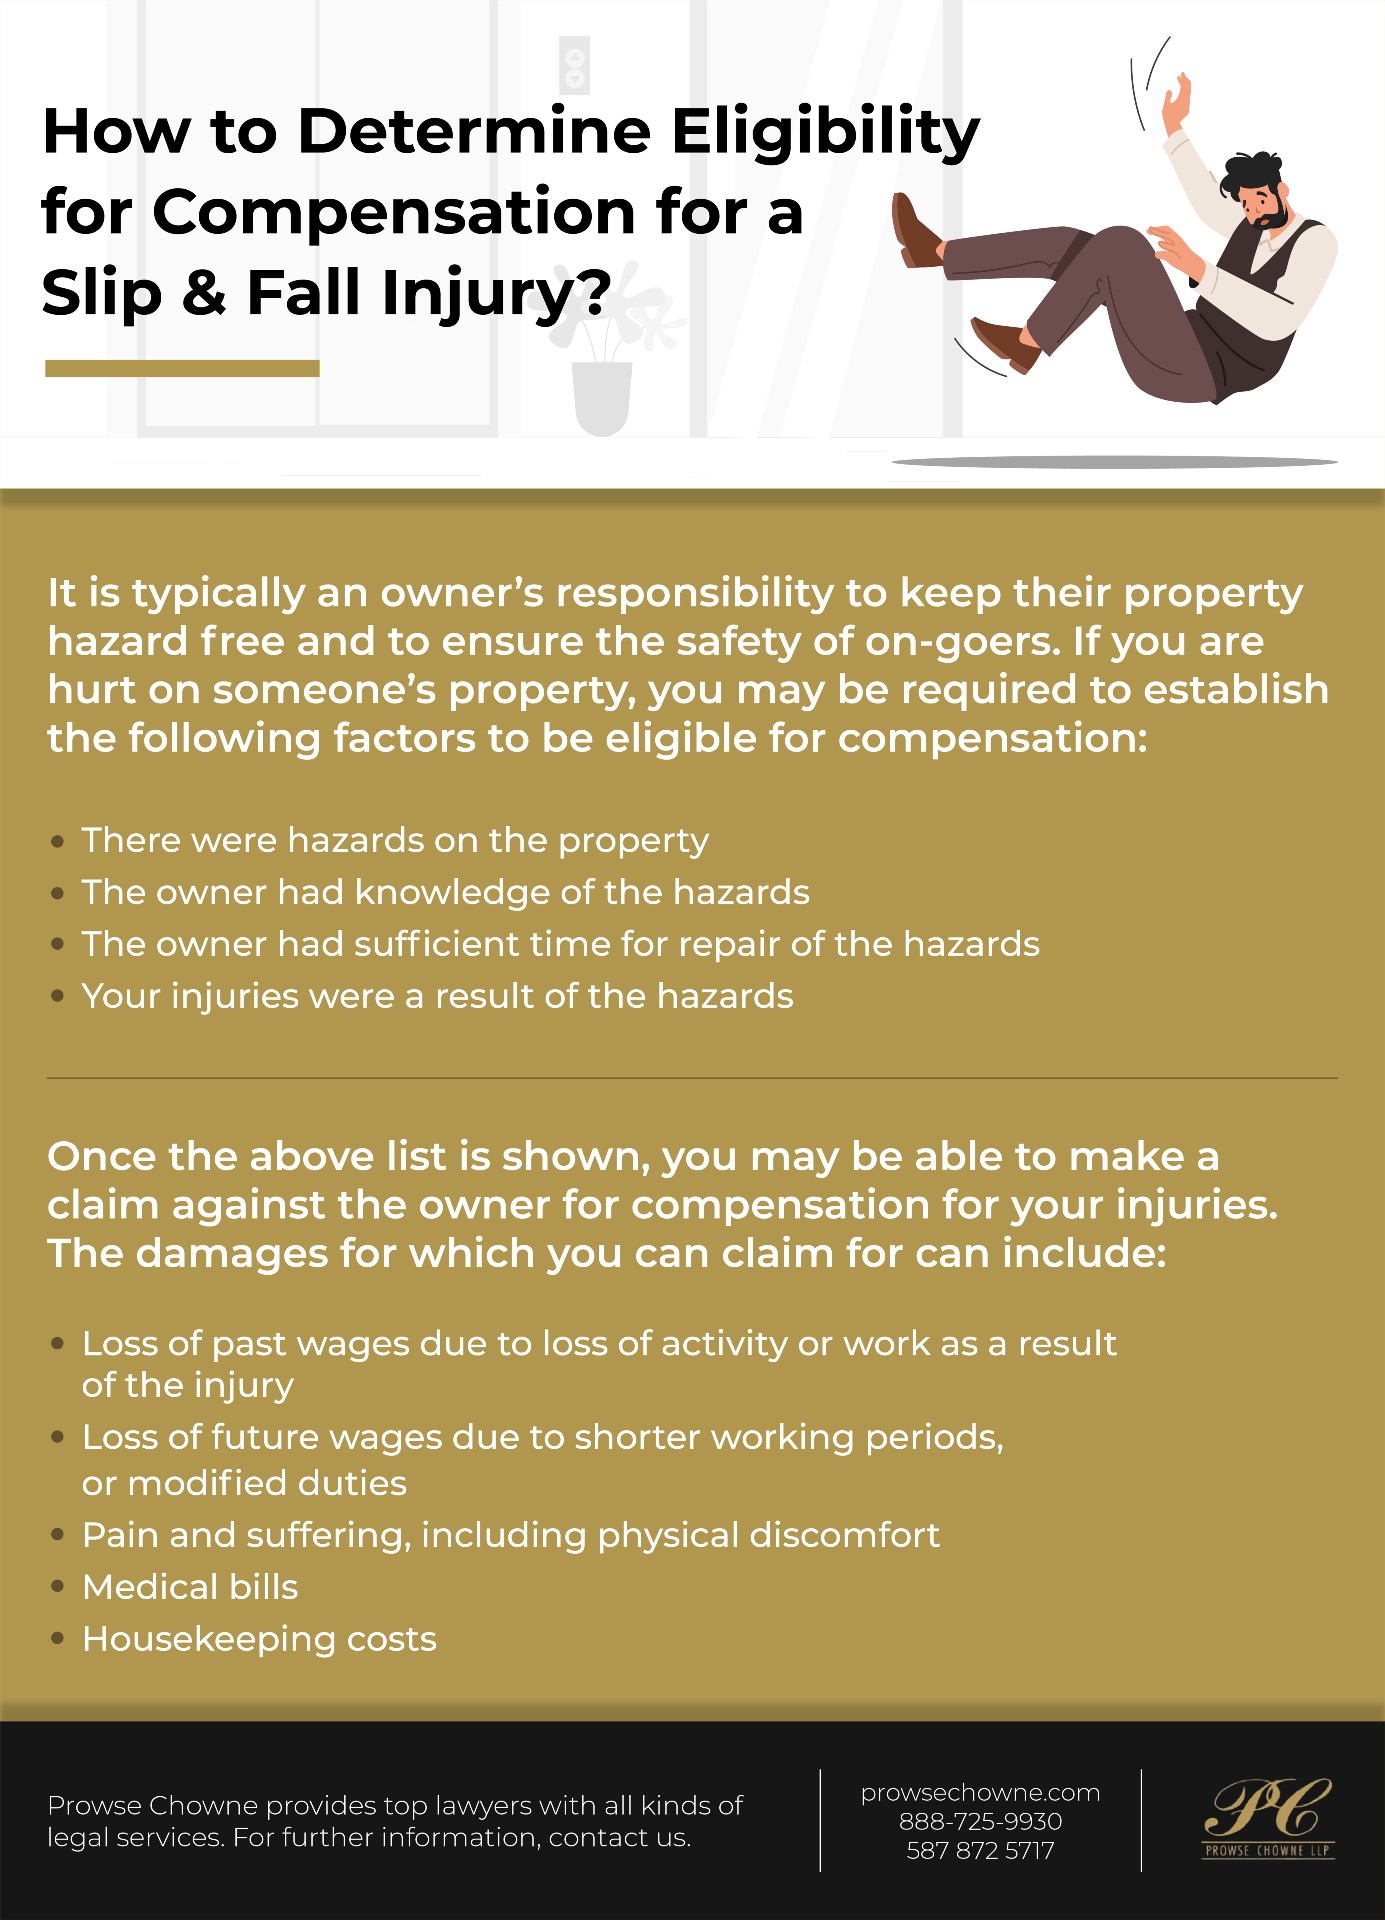 How to Get Compensation For a Slip & Fall Injury